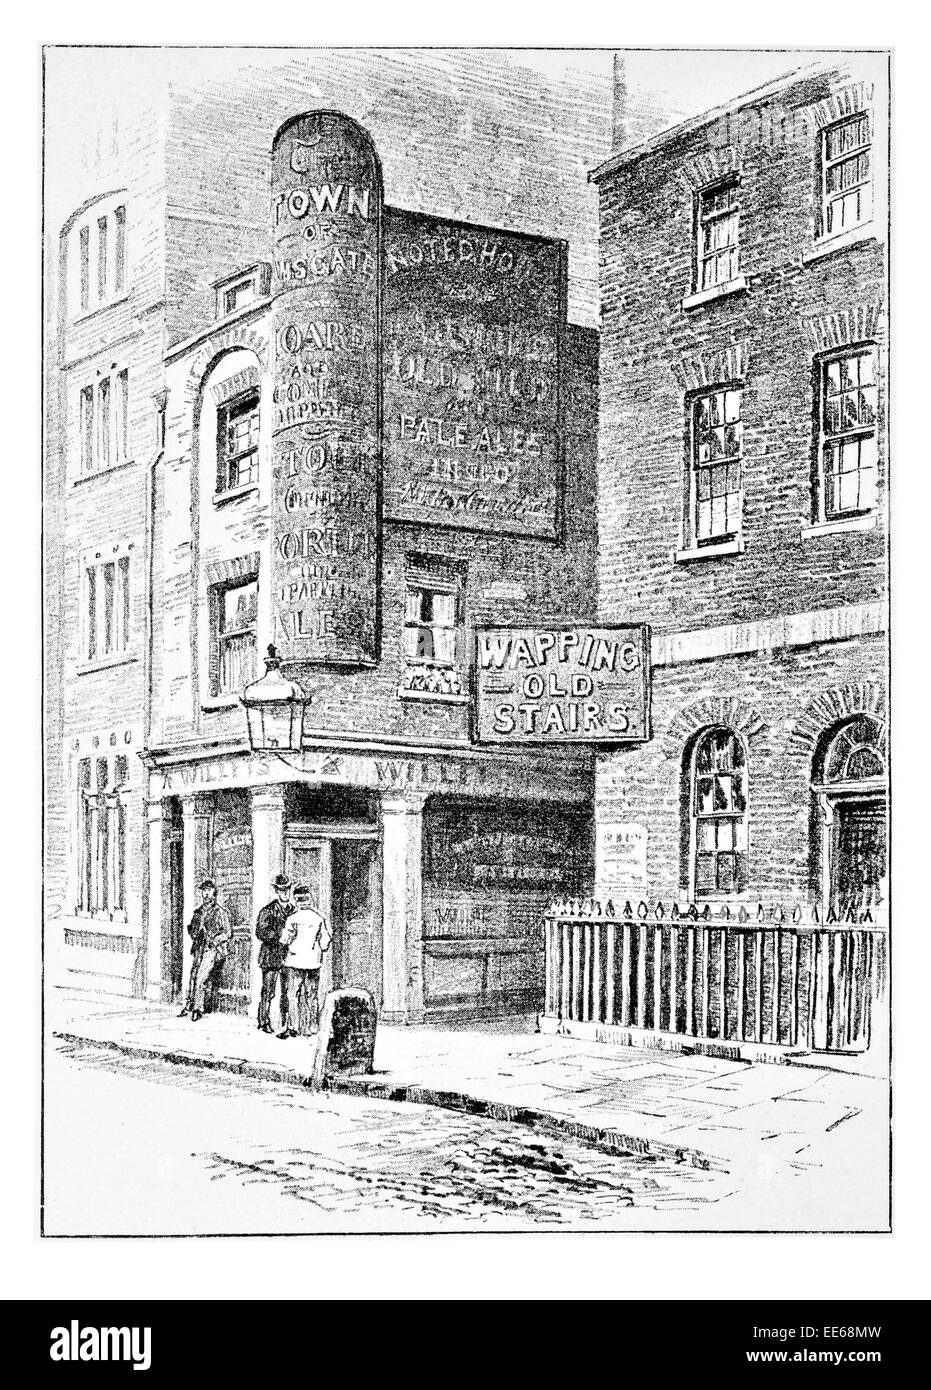 The Town of Ramsgate public house pub Wapping Old stairs ancient hamlet Wapping London Borough Tower Hamlets tavern ale beer Stock Photo